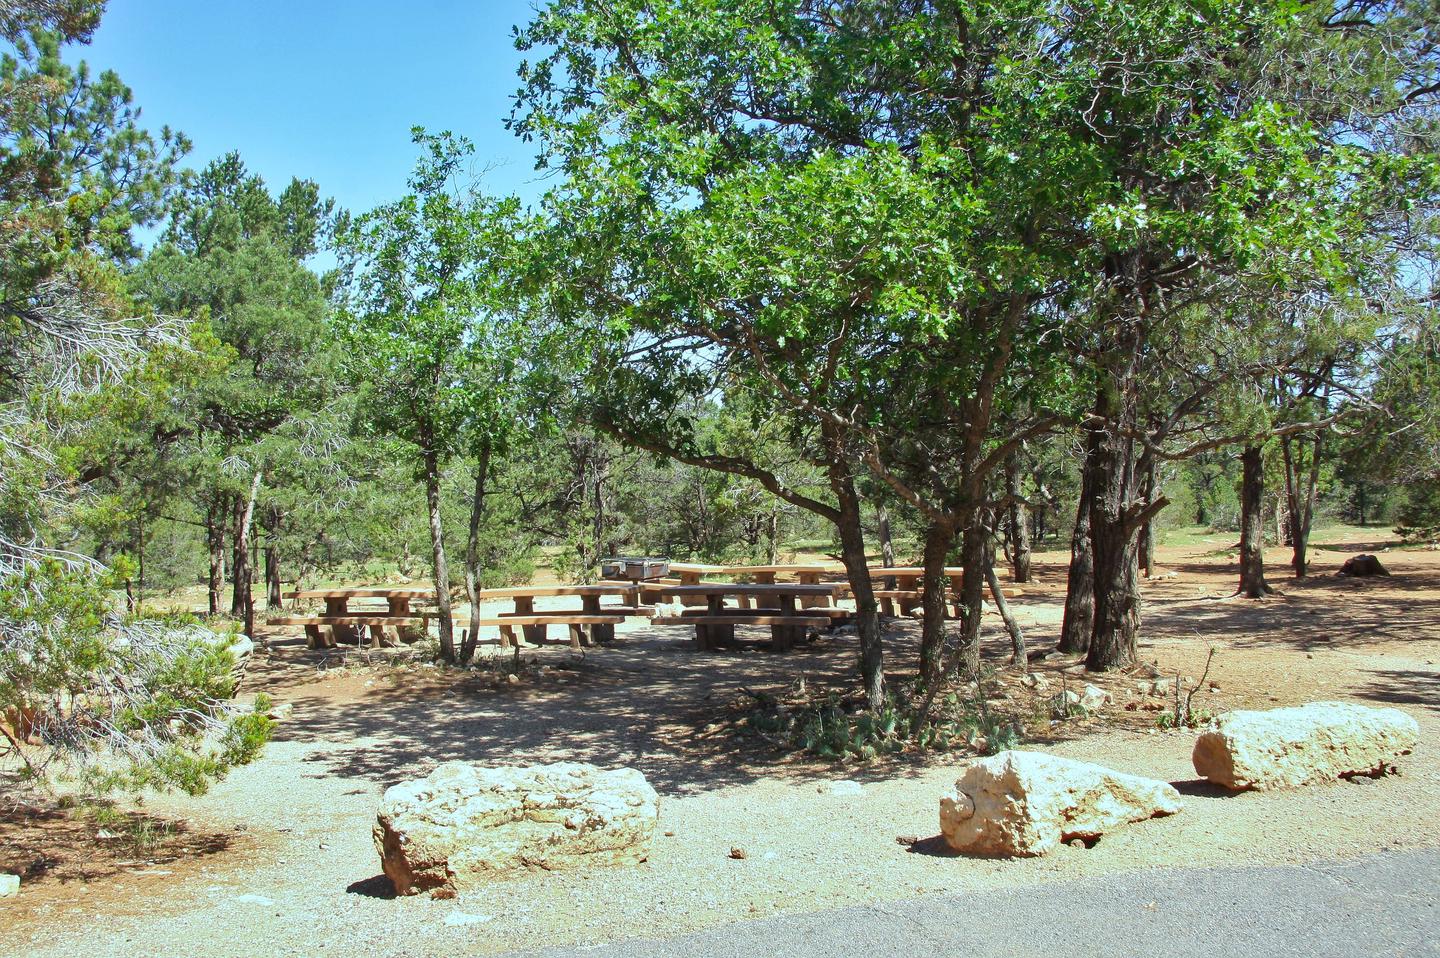 Picnic tables, fire pit, and parking spot, Mather Campground